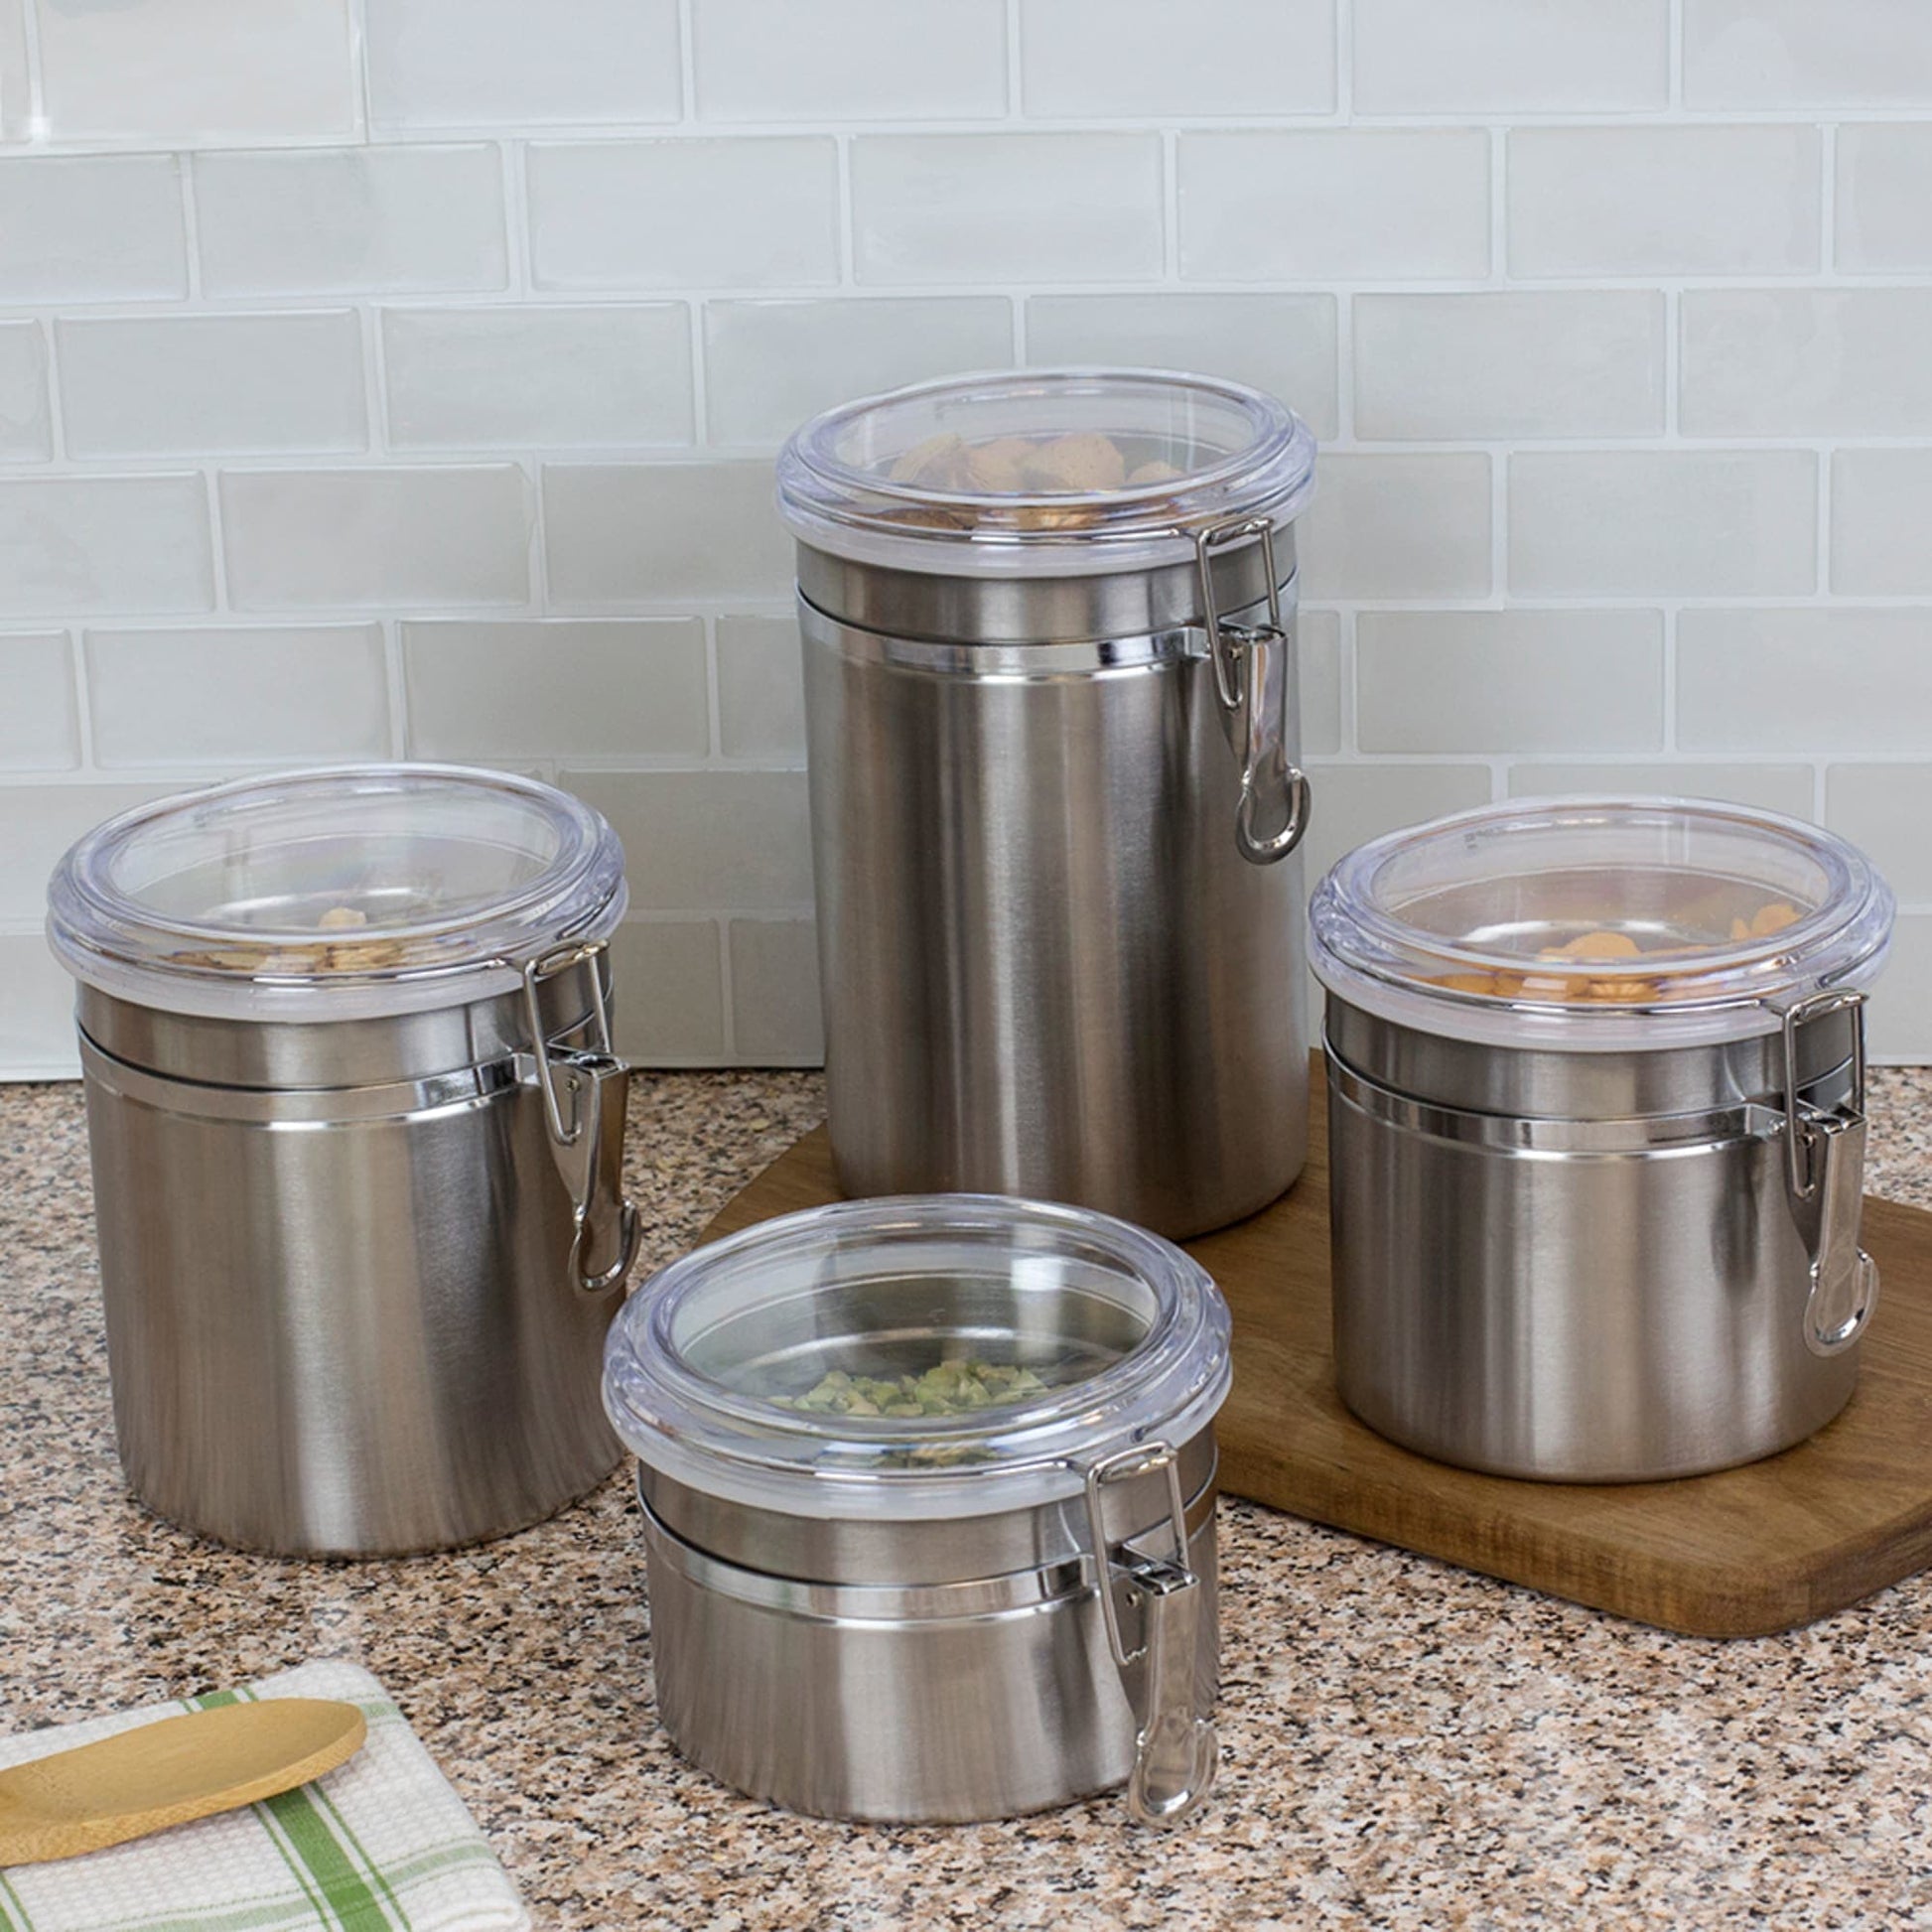 Home Basics 4-Piece Glass Canister Set with Stainless Steel Lids